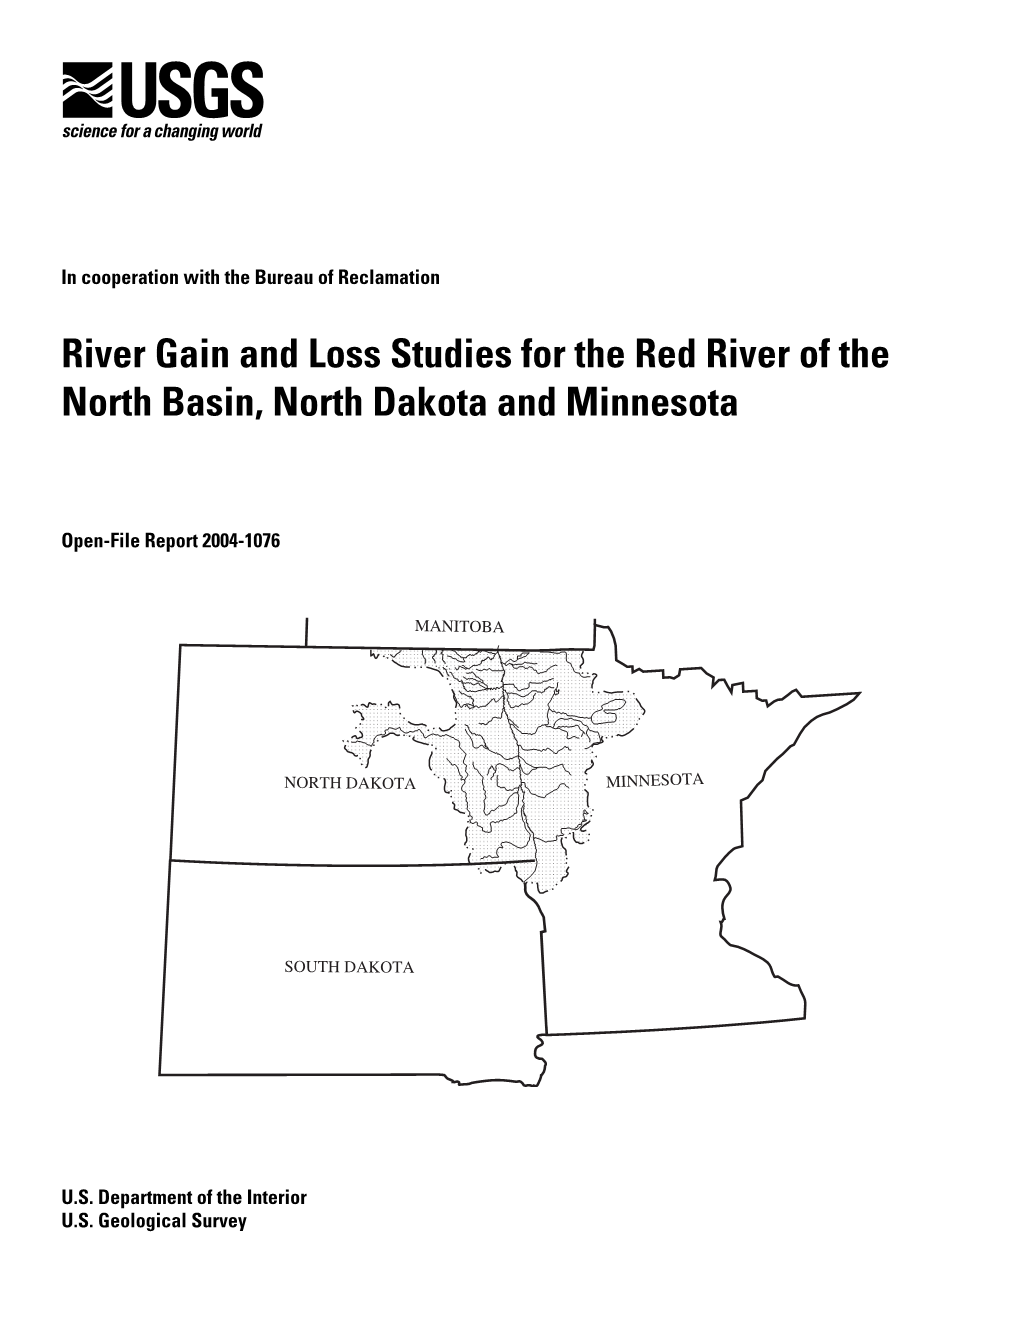 River Gain and Loss Studies for the Red River of the North Basin, North Dakota and Minnesota